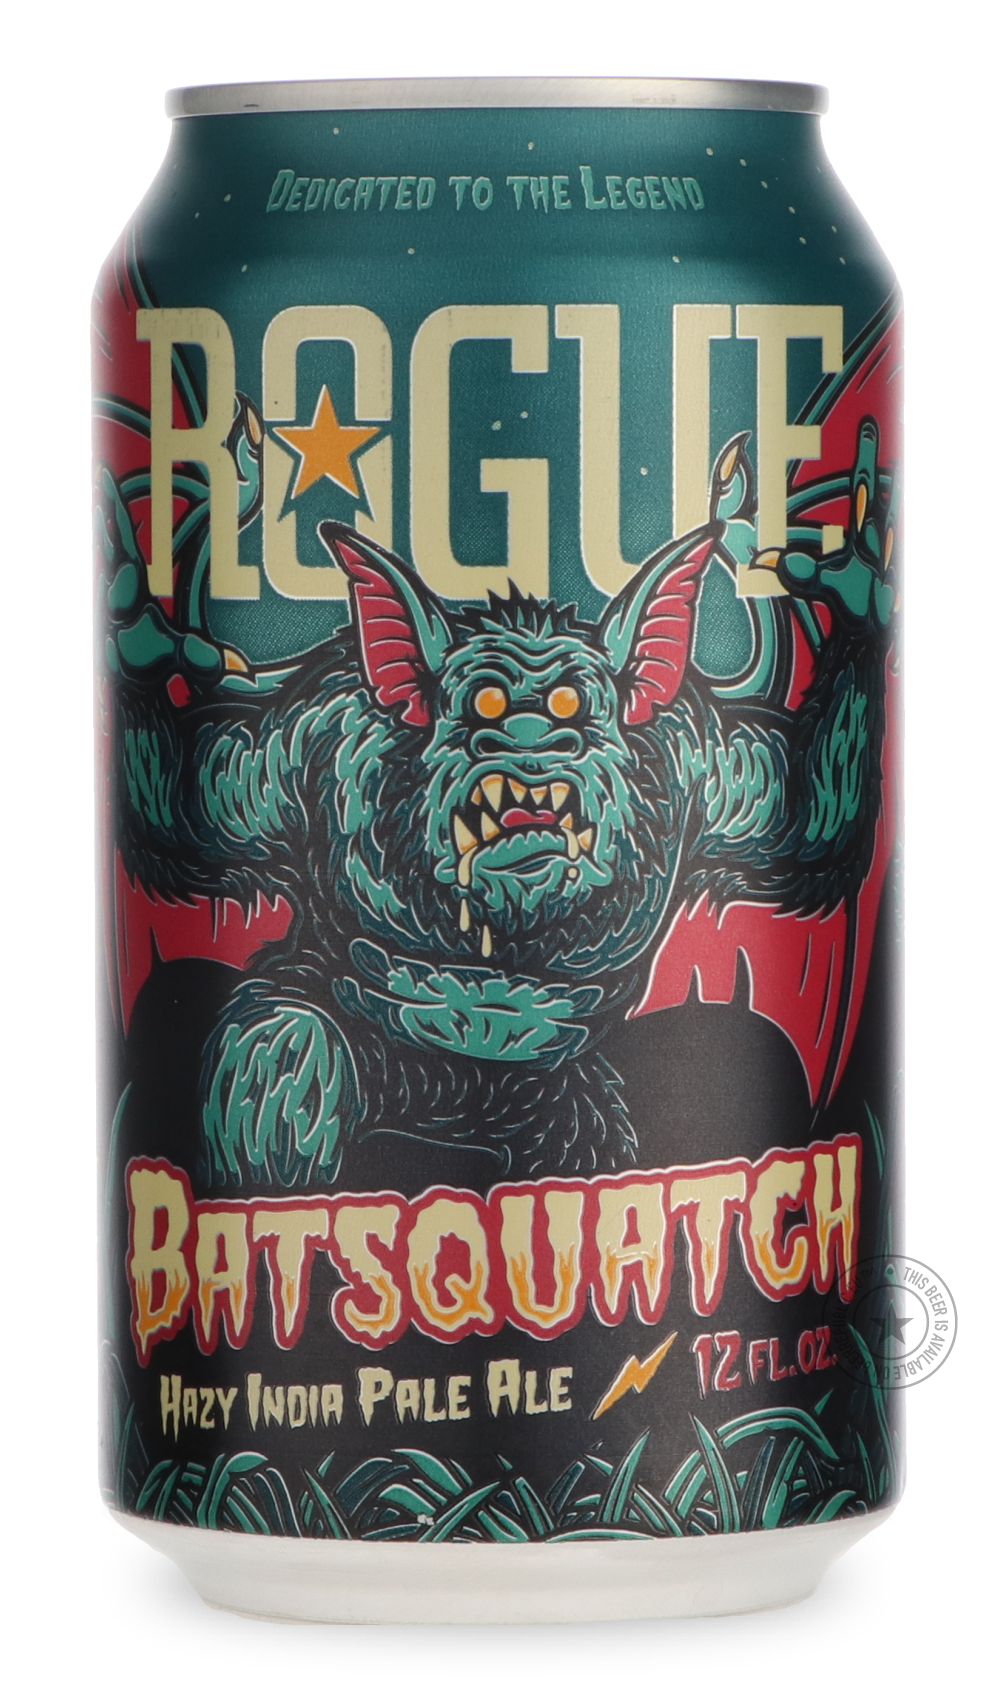 -Rogue- Batsquatch-IPA- Only @ Beer Republic - The best online beer store for American & Canadian craft beer - Buy beer online from the USA and Canada - Bier online kopen - Amerikaans bier kopen - Craft beer store - Craft beer kopen - Amerikanisch bier kaufen - Bier online kaufen - Acheter biere online - IPA - Stout - Porter - New England IPA - Hazy IPA - Imperial Stout - Barrel Aged - Barrel Aged Imperial Stout - Brown - Dark beer - Blond - Blonde - Pilsner - Lager - Wheat - Weizen - Amber - Barley Wine - 